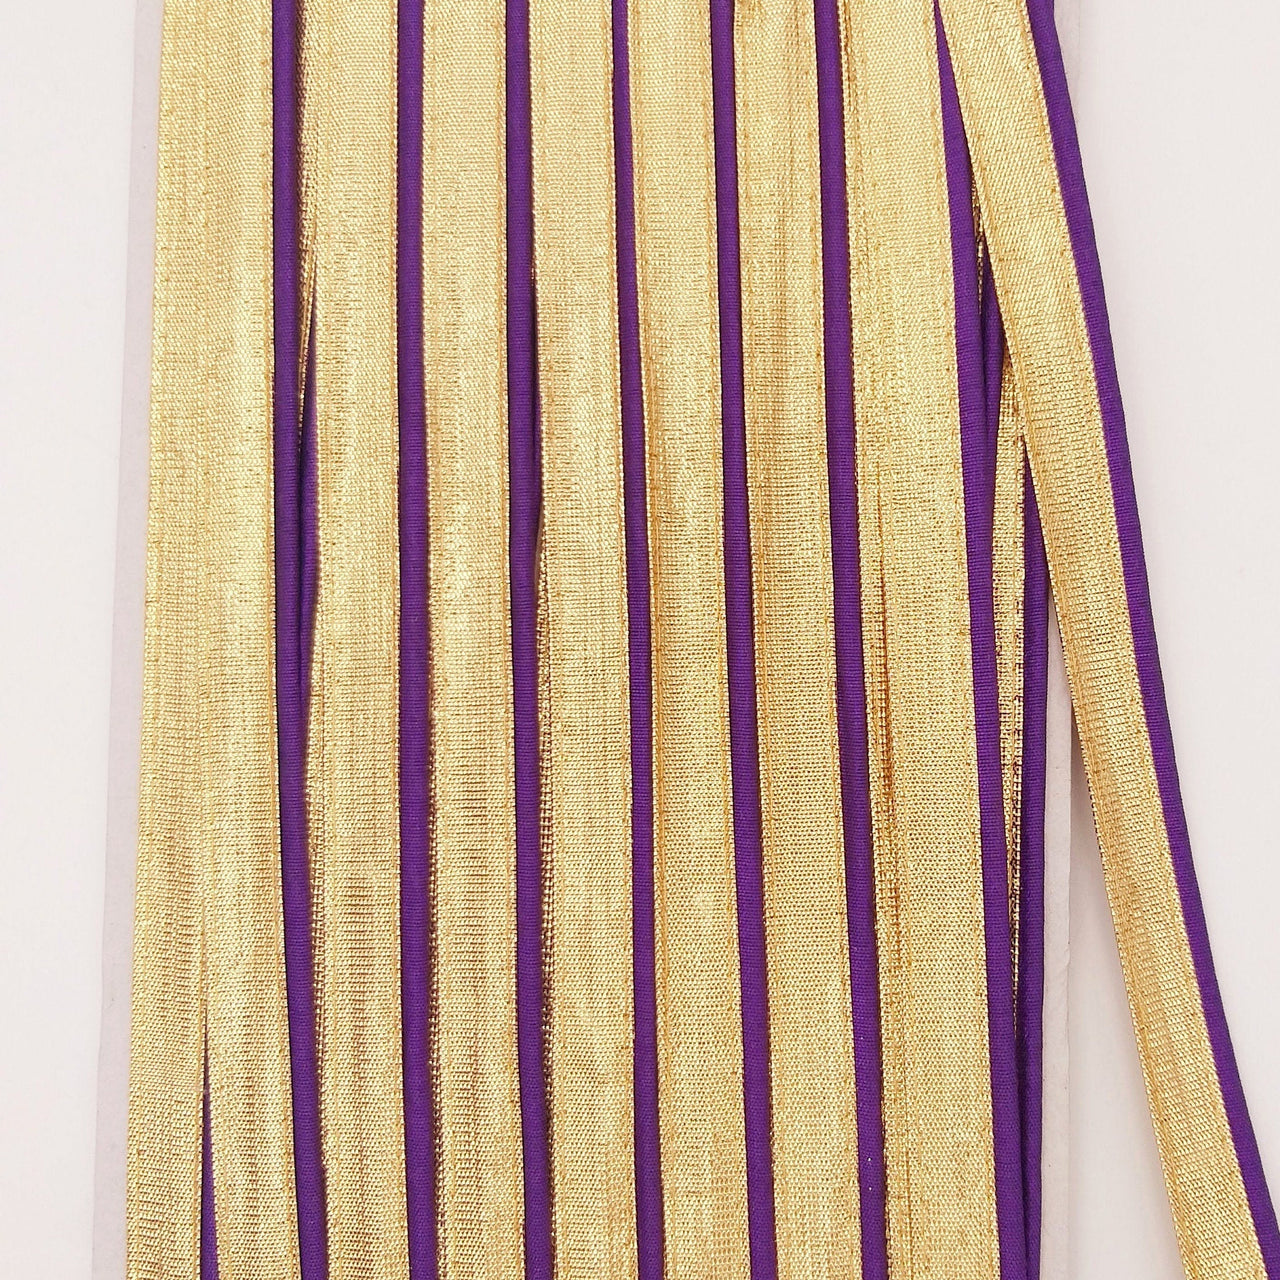 3 Yards, Flanged Insertion Gold Fabric Trim With Violet Piping, 15mm Cord piping Trim Decorative Sewing Edge Trim Flanged Piping Cord